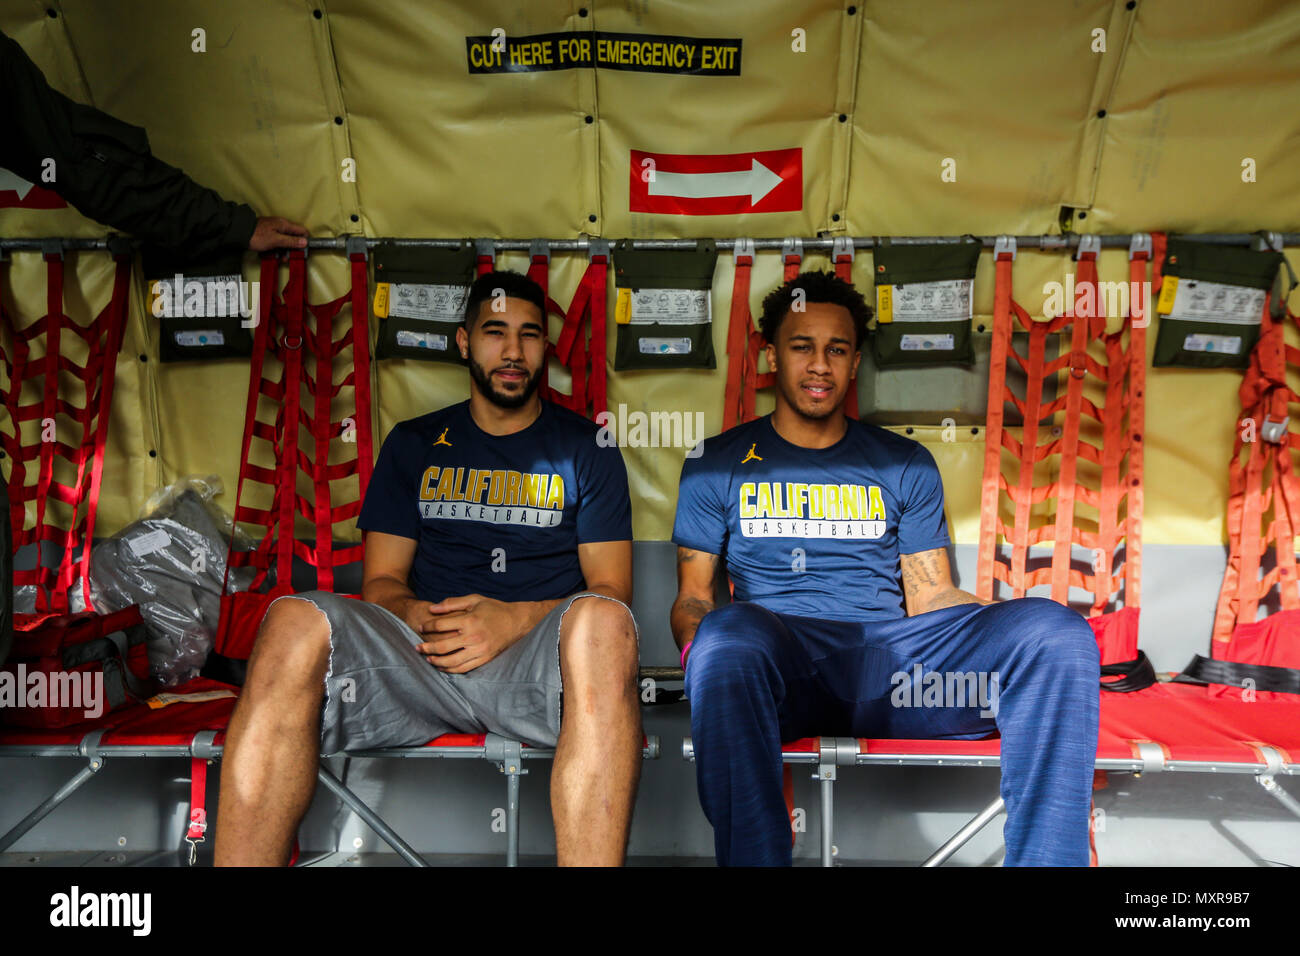 University of California, Berkeley basketball players sit inside of a KC-135 Stratotanker during a static-display demonstration at Joint Base Pearl Harbor-Hickam, Hawaii, Dec. 5, 2016. The basketball team is in Hawaii to play in the Fox Sports Pearl Harbor Invitational Dec. 6 - 7 at Bloch Arena on Joint Base Pearl Harbor-Hickam. Dec. 7, 2016, marks the 75th anniversary of the attacks on Pearl Harbor and Oahu. The U.S. military and the State of Hawaii are hosting a series of remembrance events to honor the courage and sacrifices of Pacific Theater veterans. (U.S. Marine Corps photo by Cpl. Wesl Stock Photo